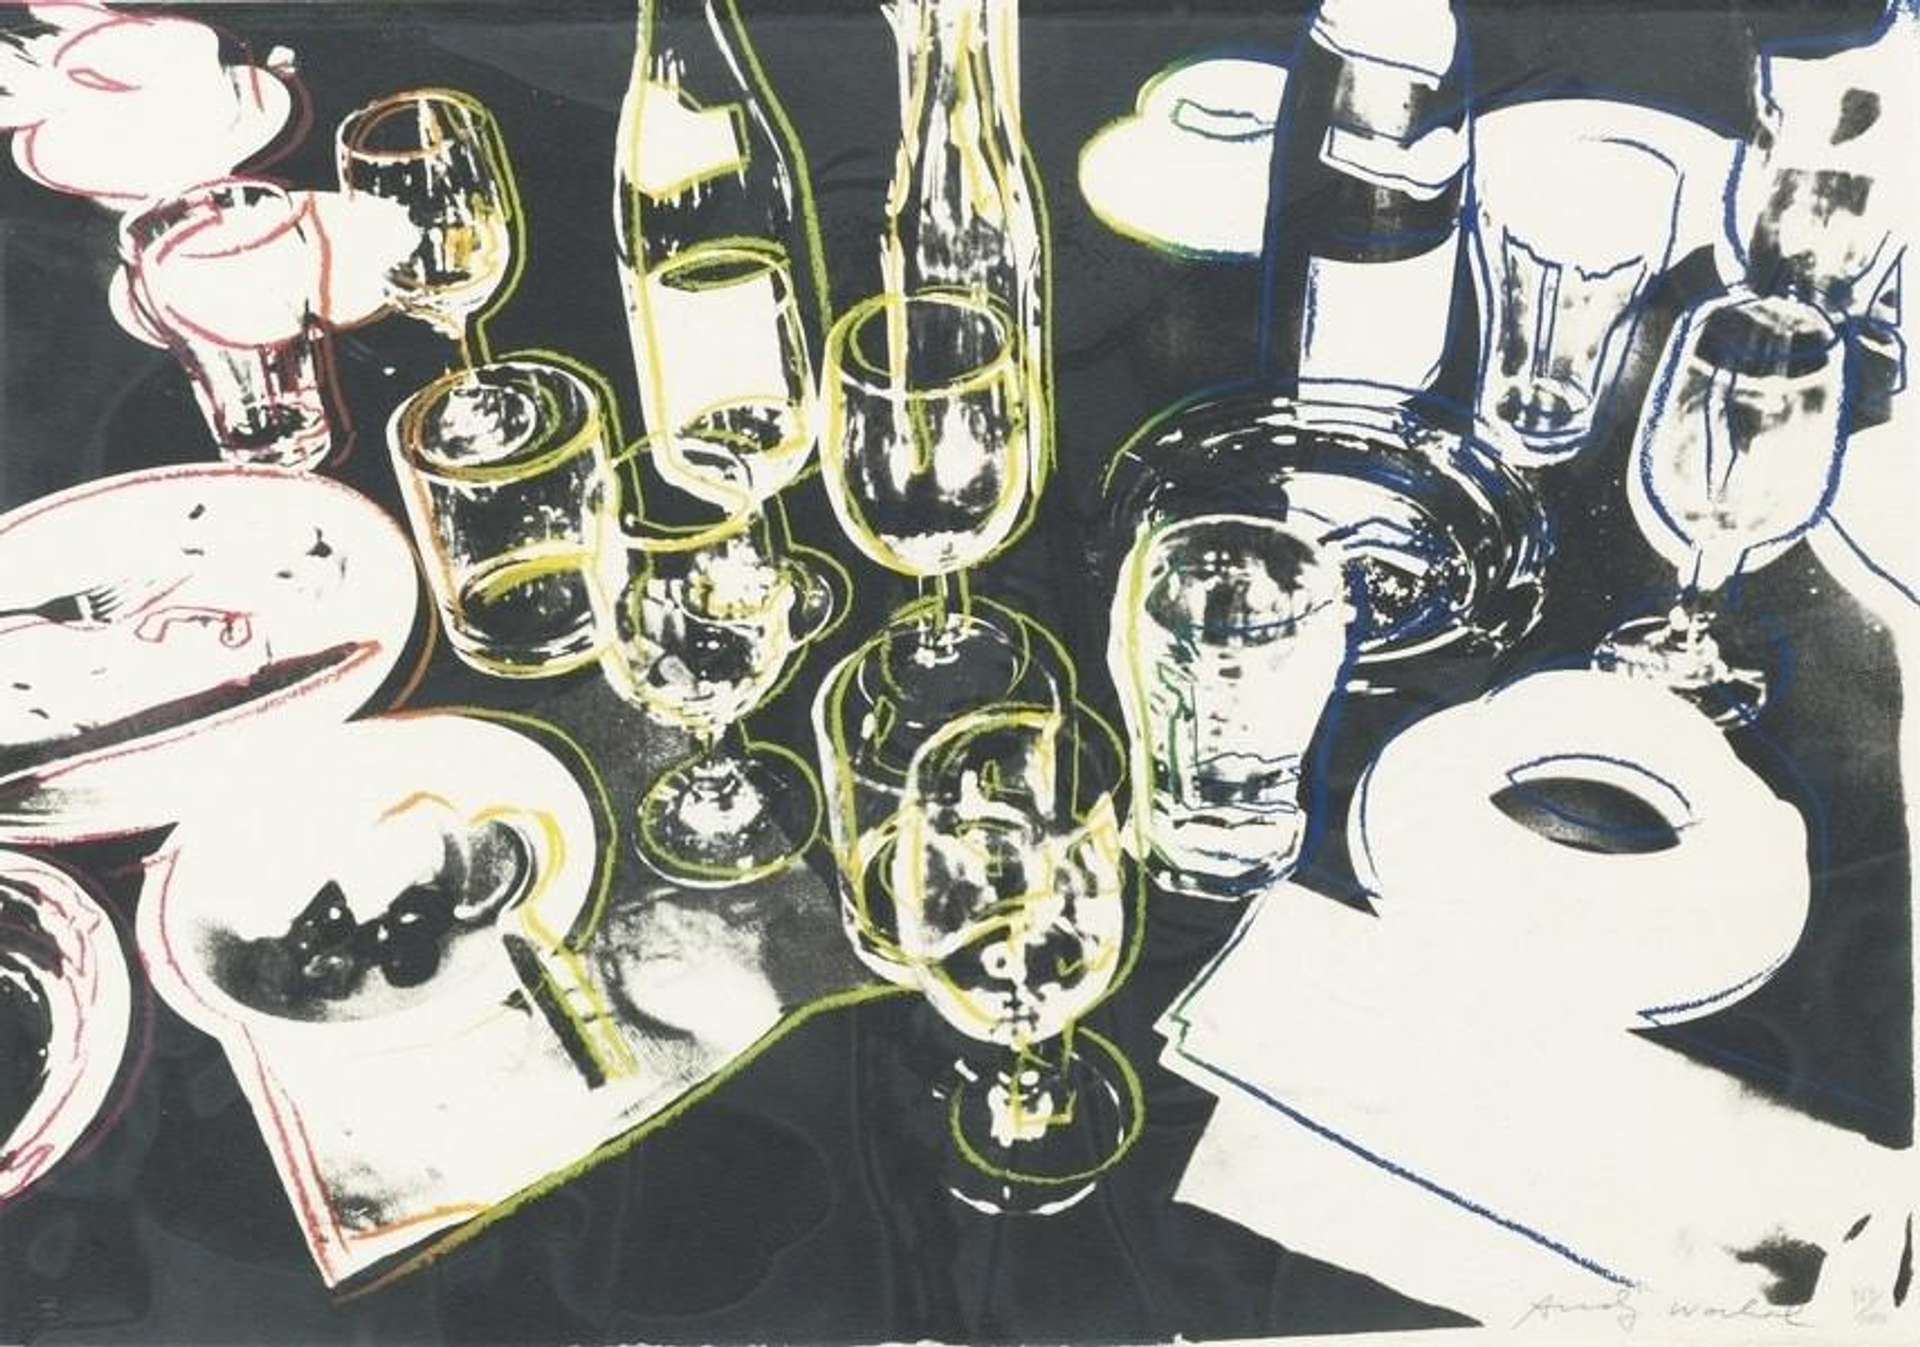 After The Party (F. & S. II.183) by Andy Warhol